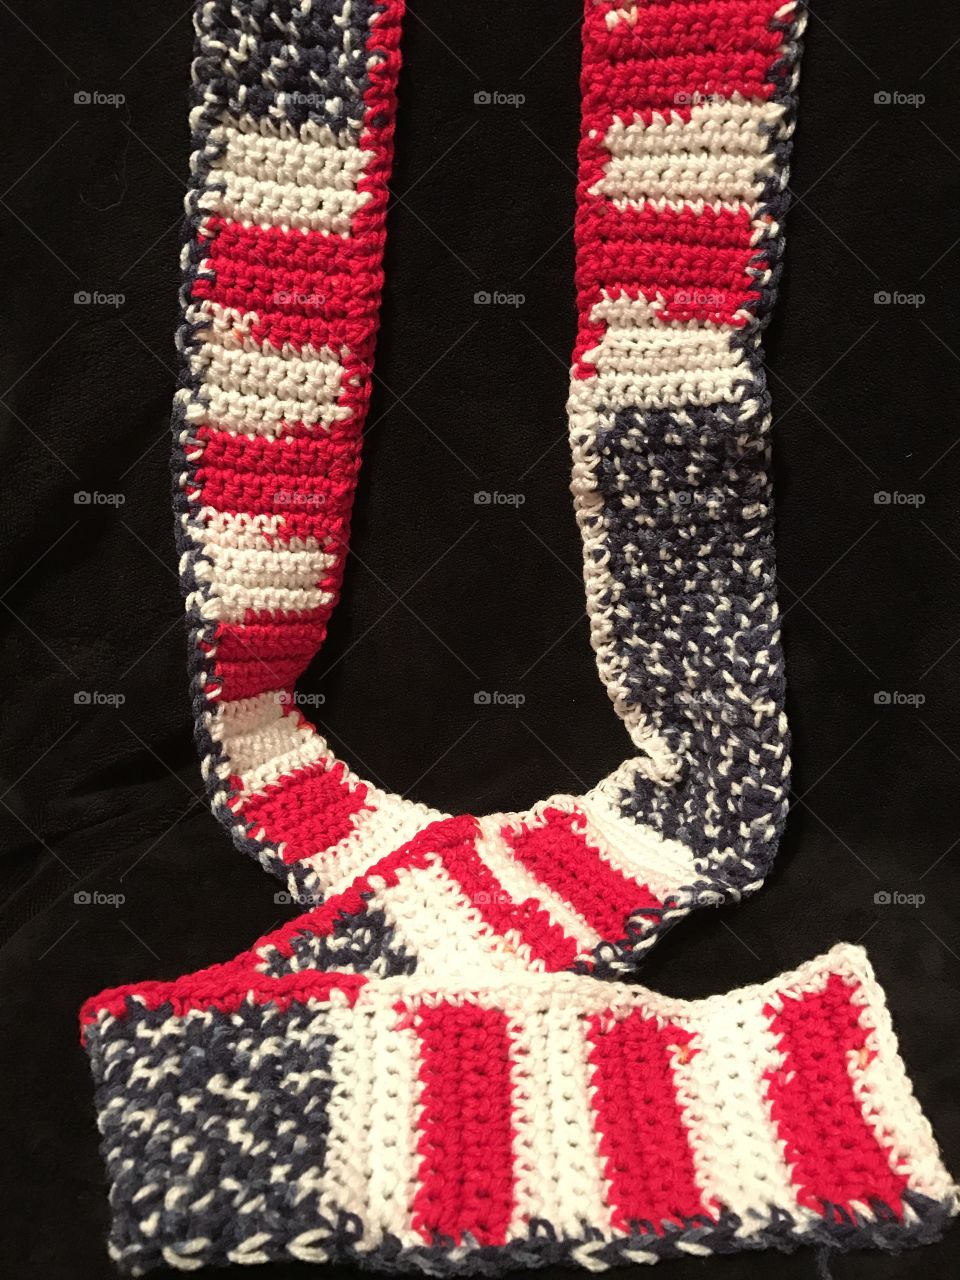 Crocheted red white and blue 